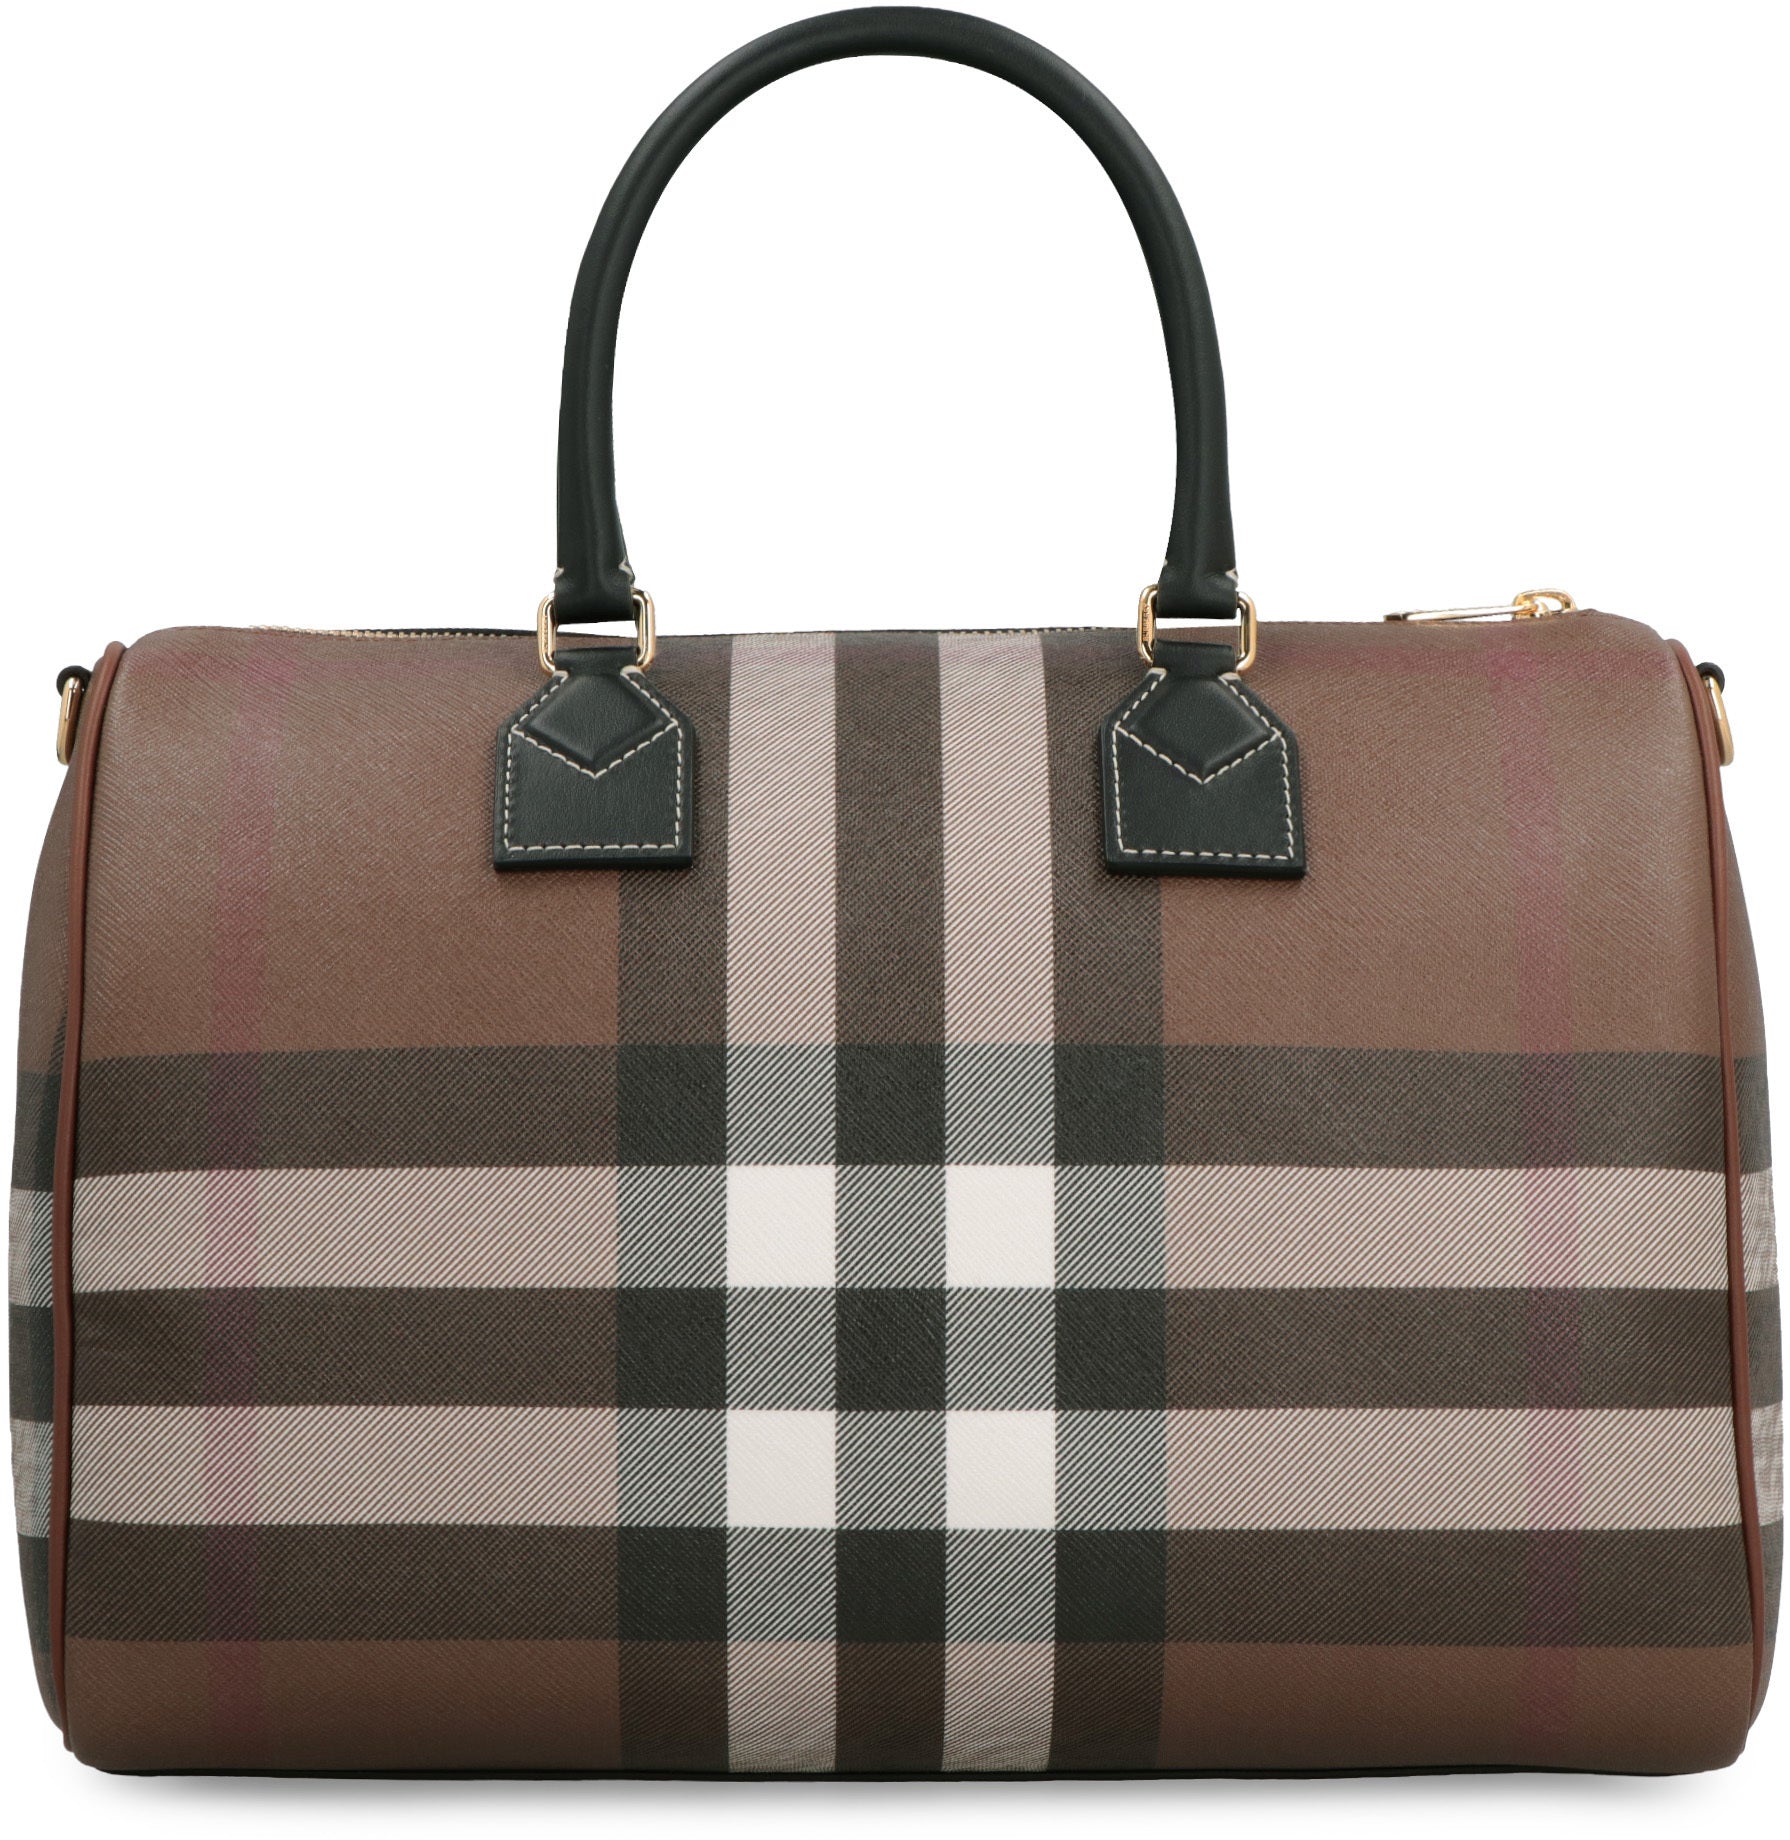 Burberry, Bags, Beautiful Burberry Boston Bag Like New Condition